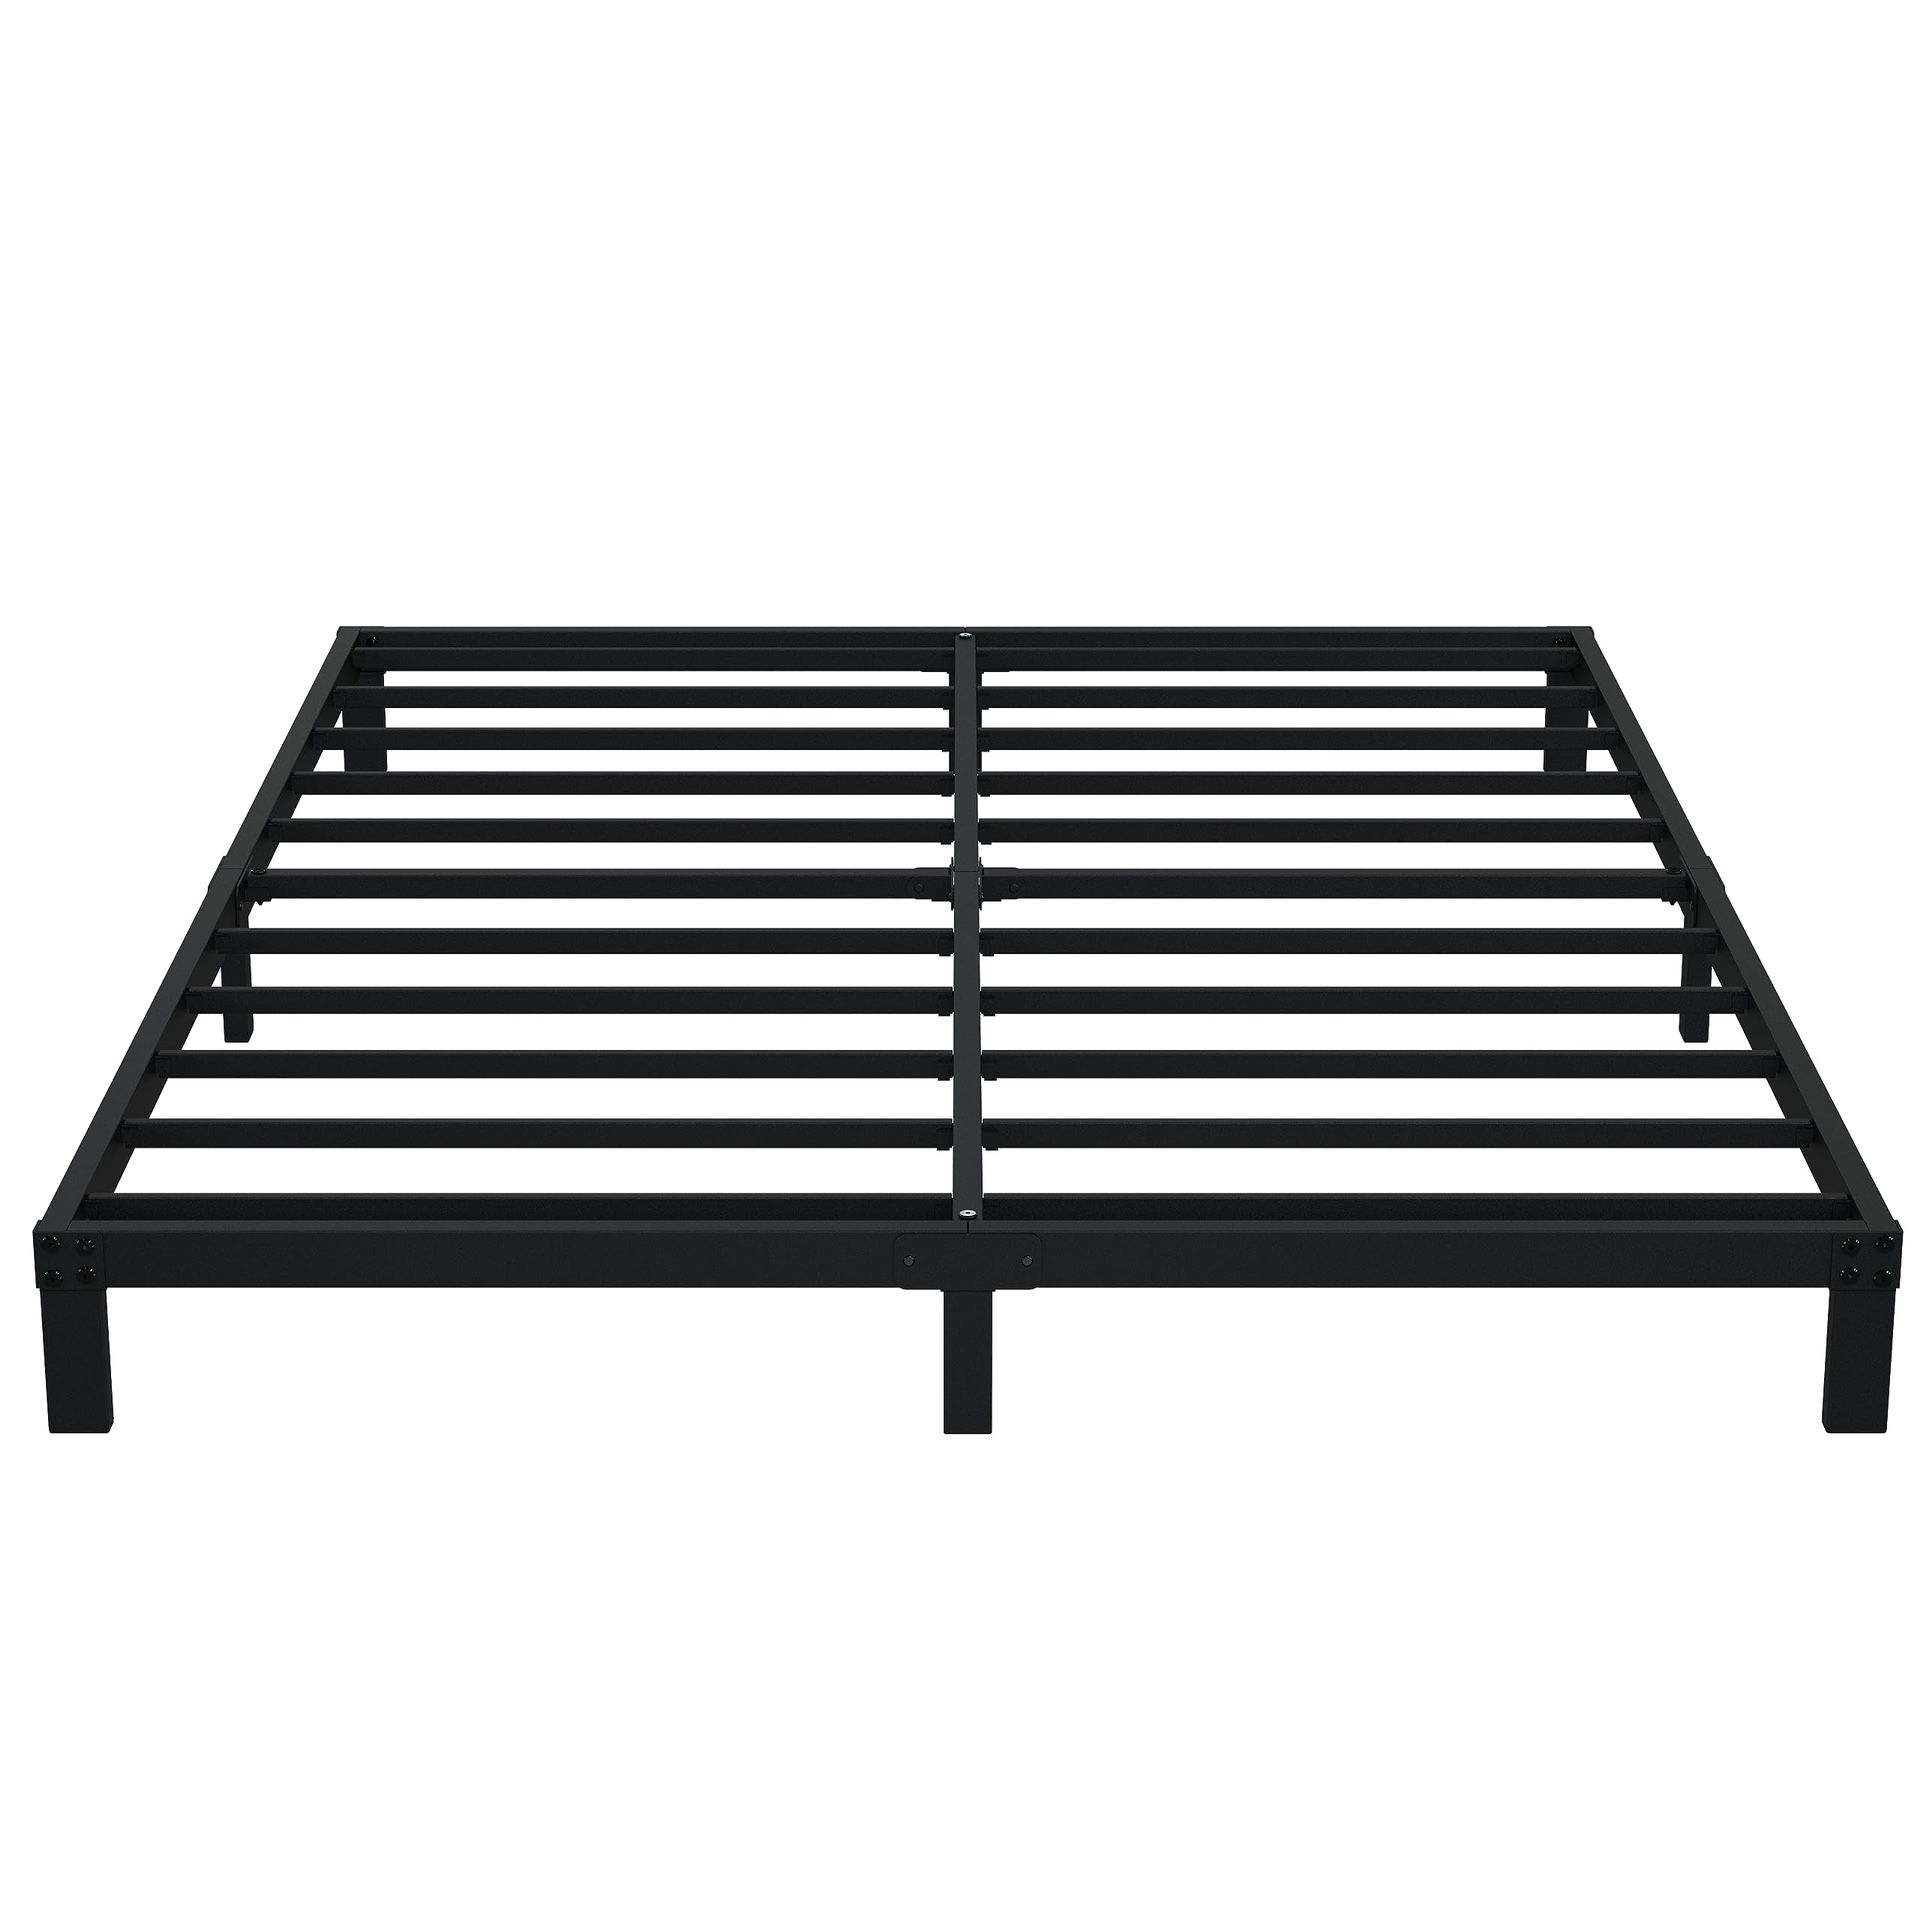 7 Inch Queen Bed Frame No Box Spring Need, Low Profile Metal Platform Bed Frame Queen Size, Heavy Duty Support Bedframes Queen, Easy Assembly